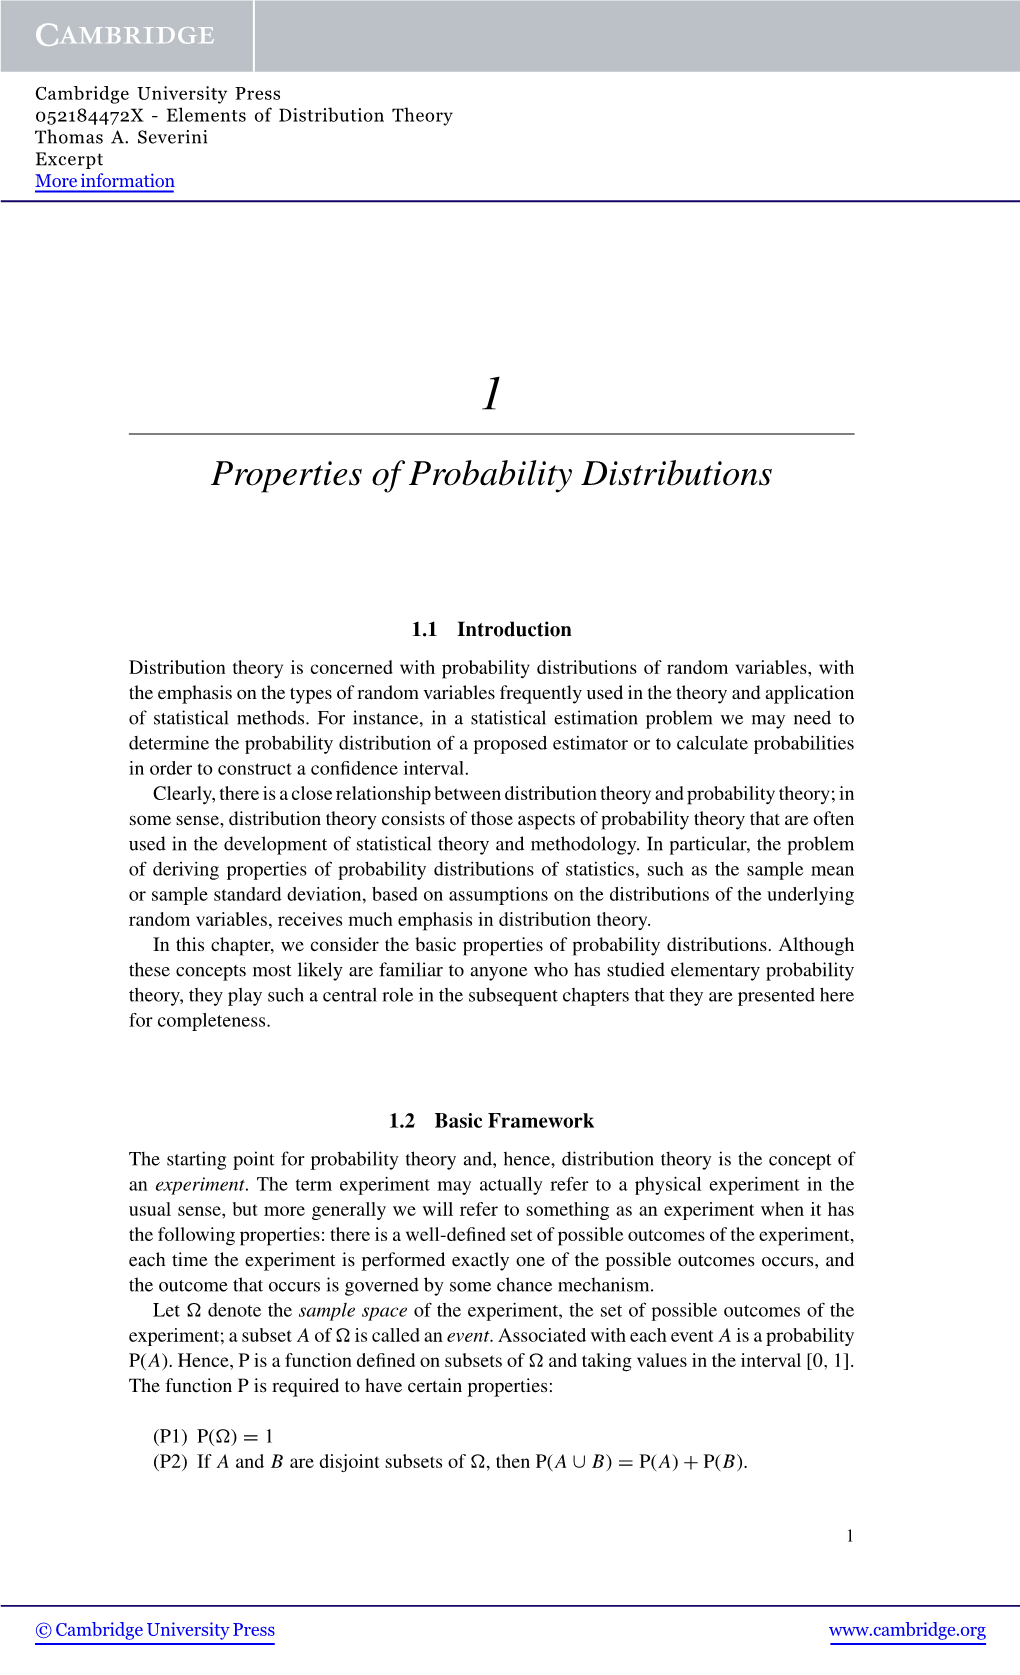 Properties of Probability Distributions